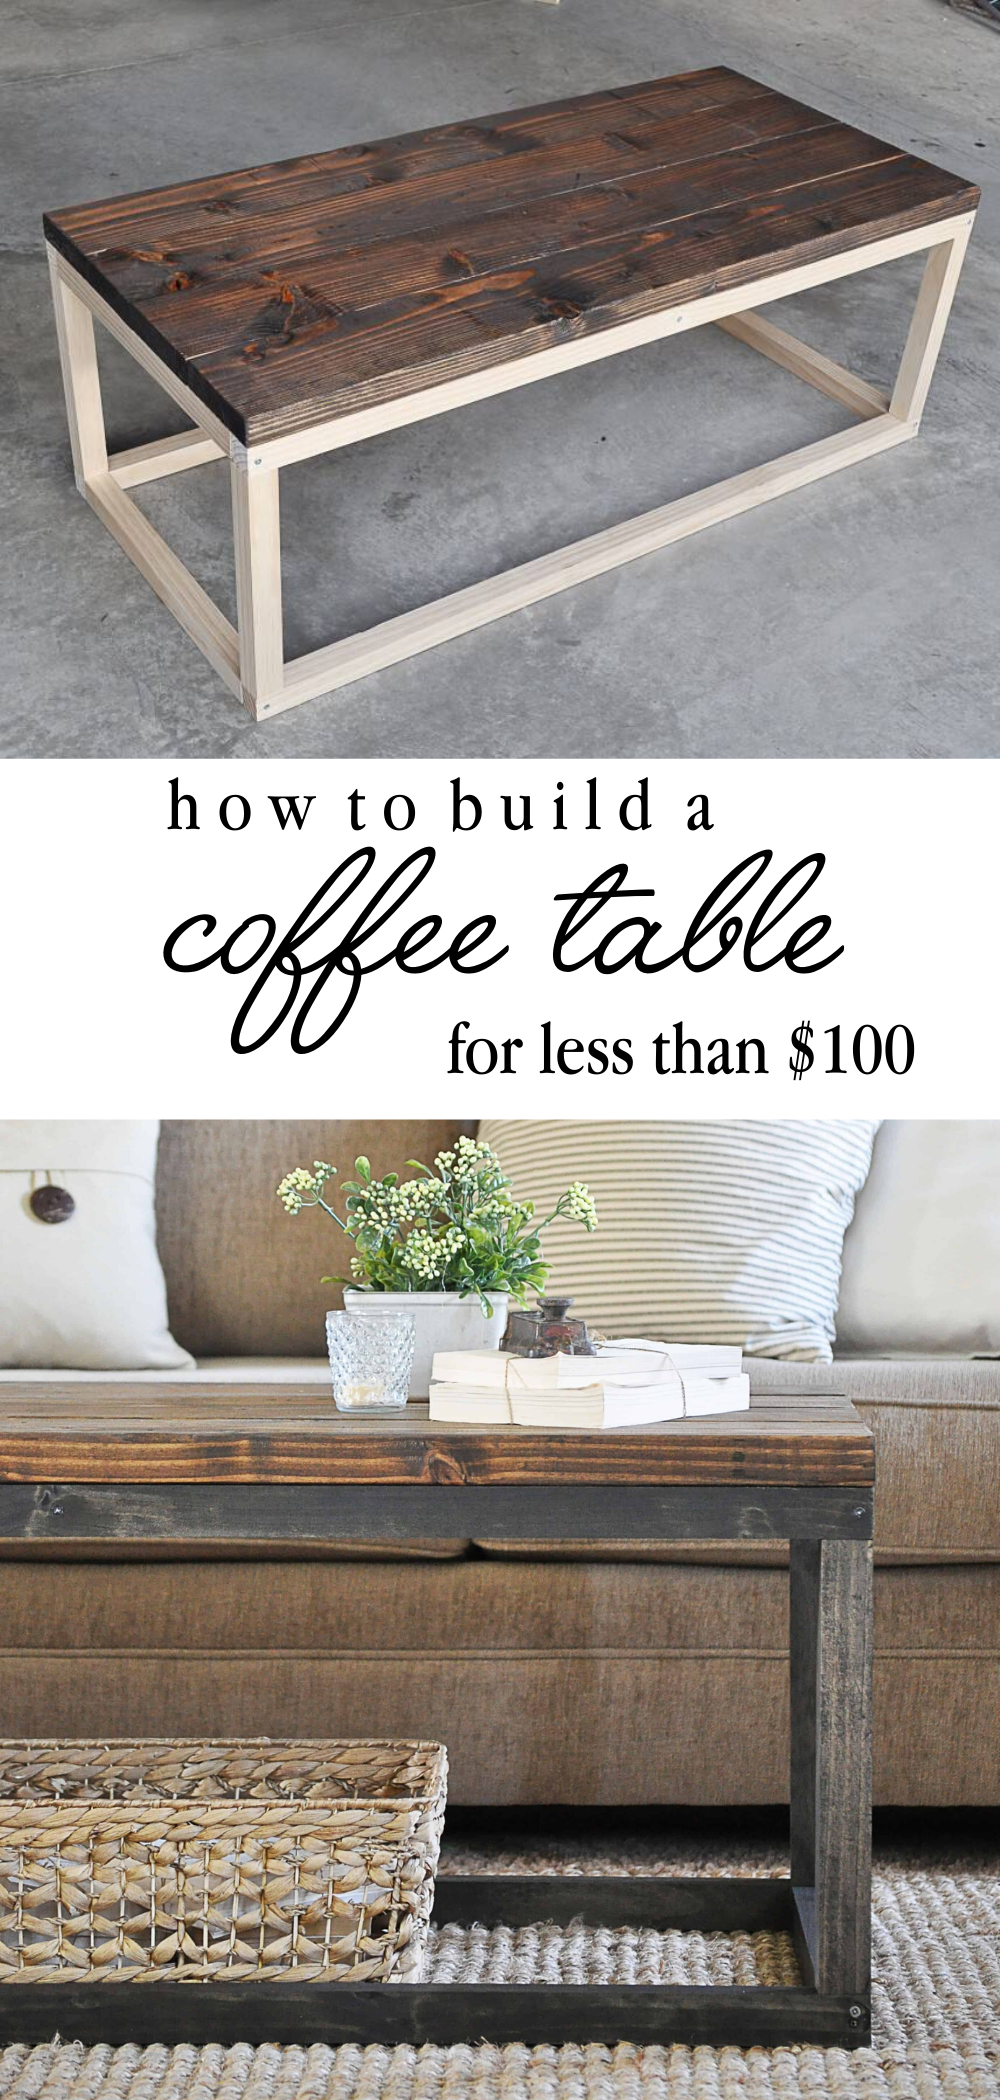 Industrial Coffee Table - Little Glass Jar -   19 diy projects Awesome coffee tables ideas